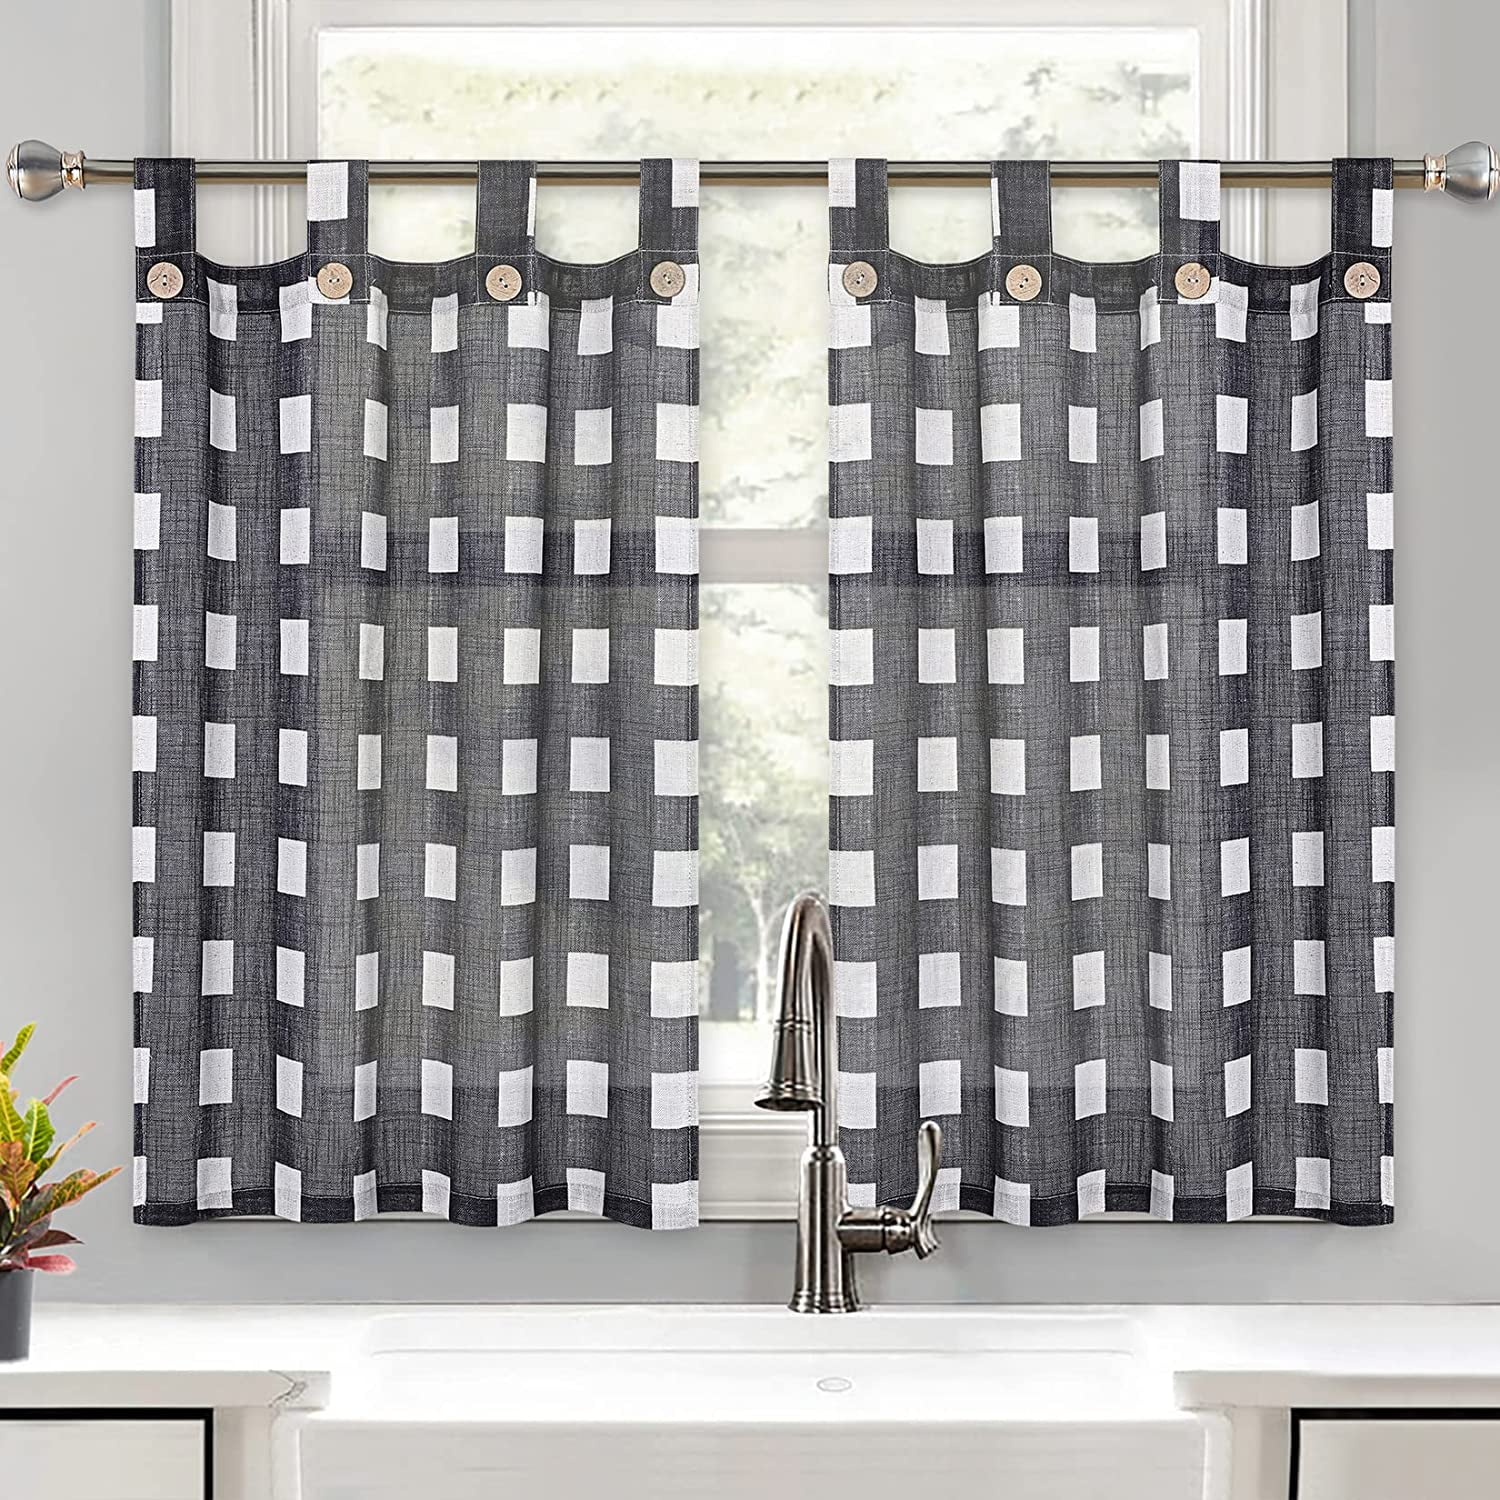 Black And White Buffalo Plaid Check Farmhouse Kitchen Curtains Gingham Prints Tiers With Solid On For Cafe Bathroom Window 2 Panels 27x24 Inches Com